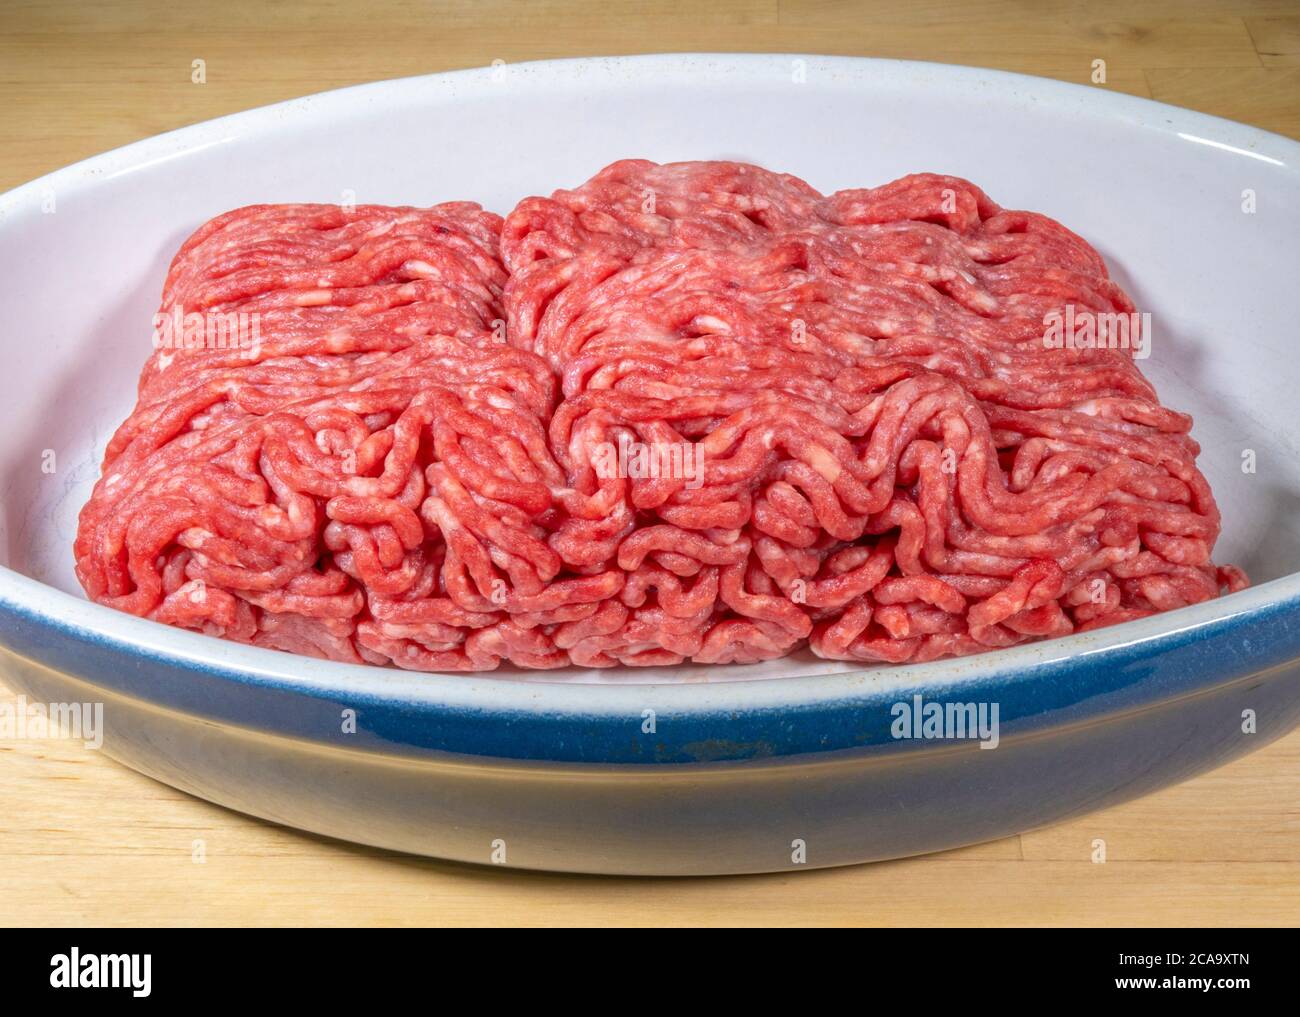 Raw supermarket British beef steak mince in a ceramic bowl, after defrosting from frozen, ready to be cooked. 500 grammes in weight.10% fat content. Stock Photo